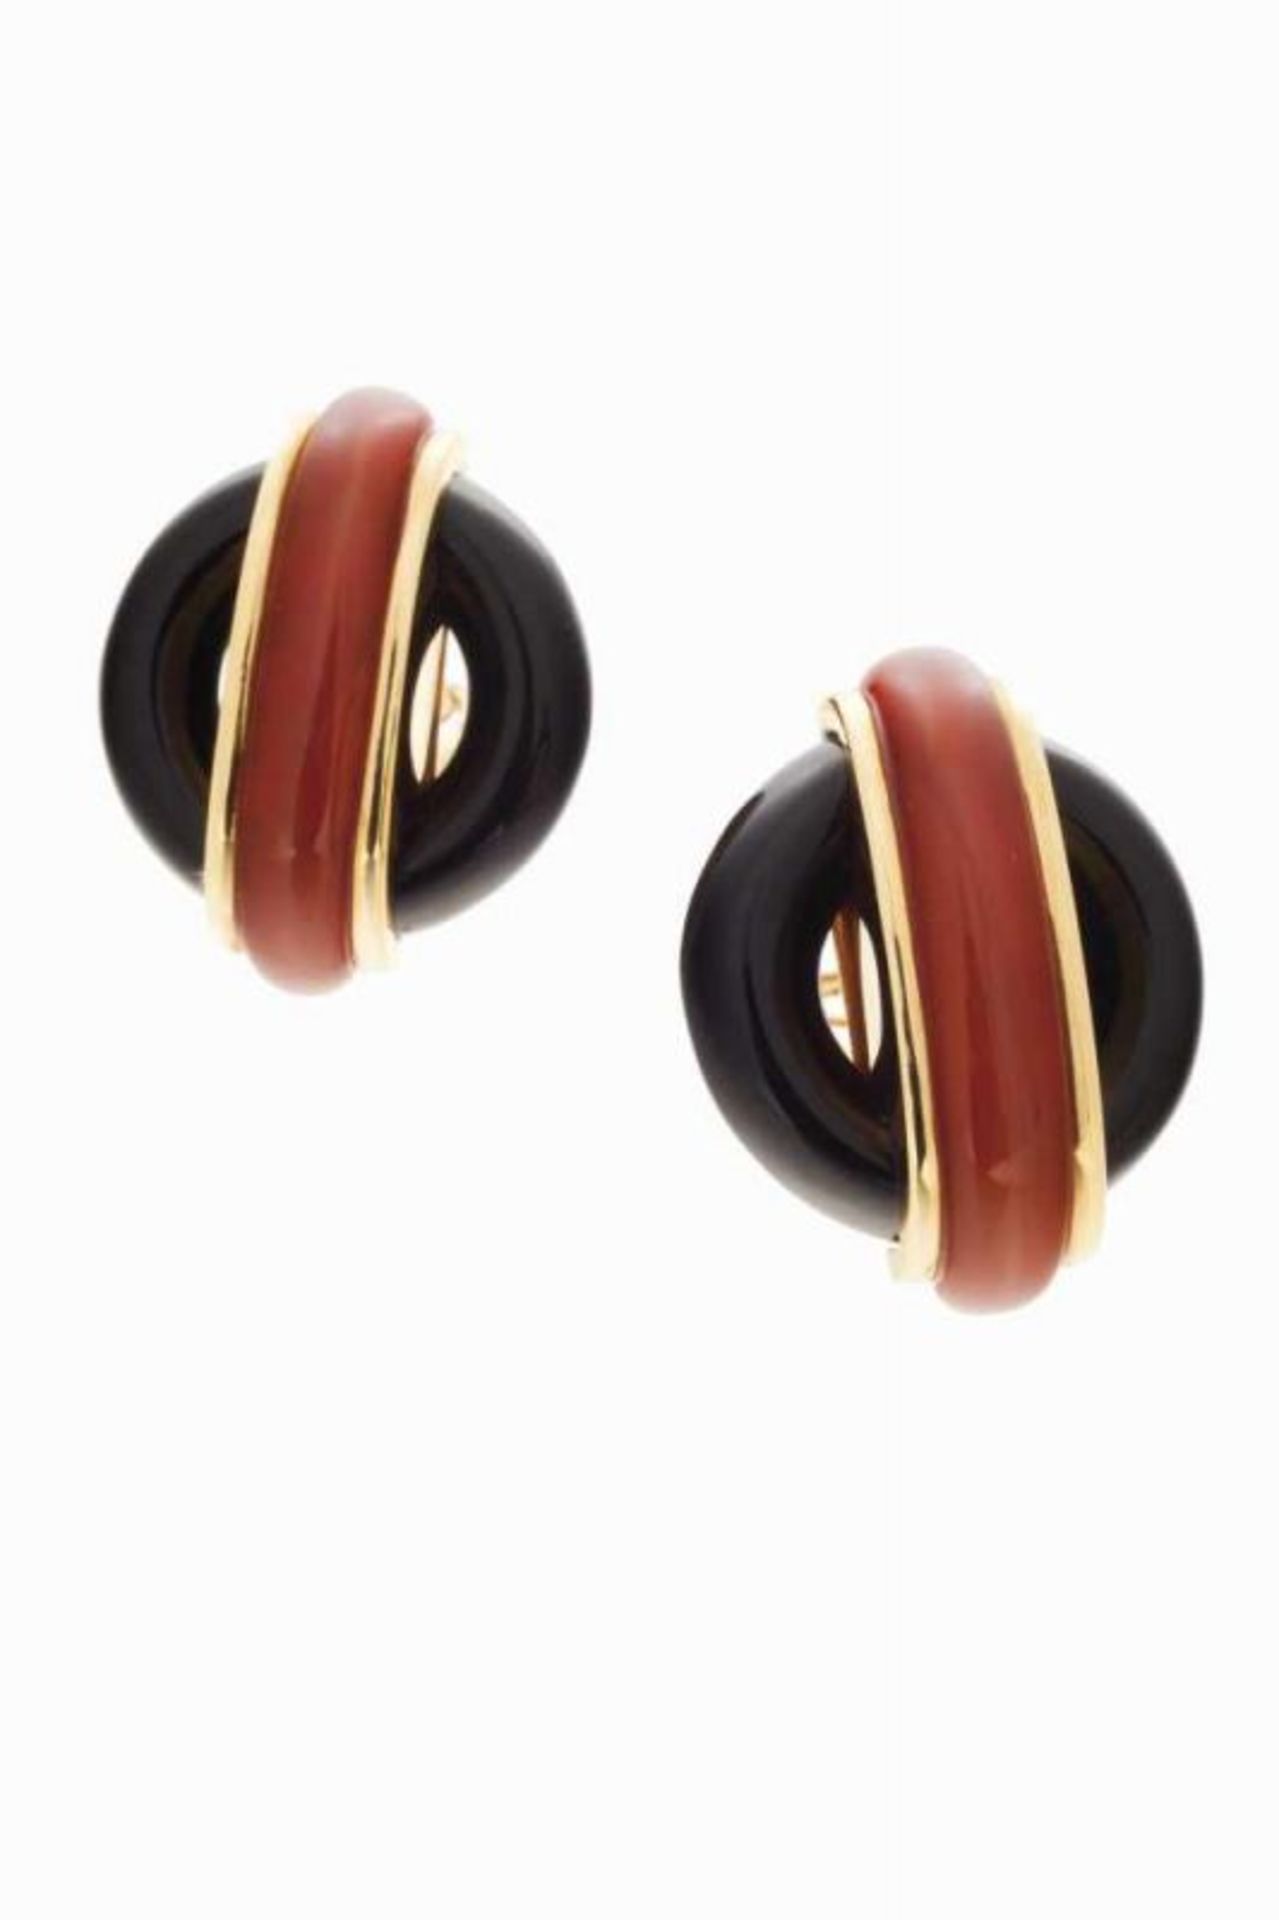 A rare pair of earrings, CARTIER by Aldo CIPULLO 18kt gold, onyx and carnelian agate Designed as